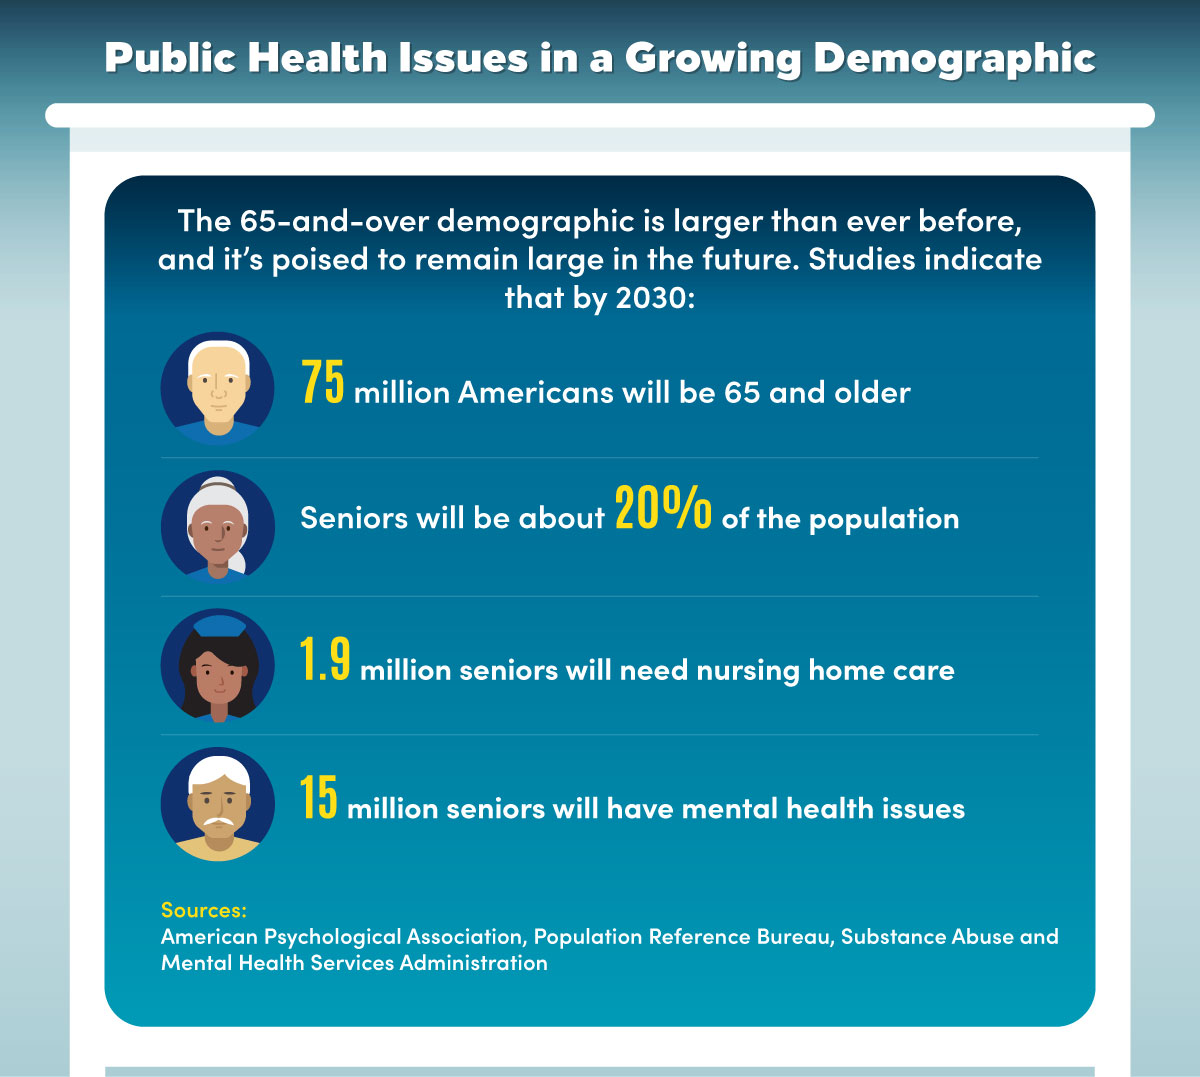 Public health issues are growing in the 65-and-older demographic.